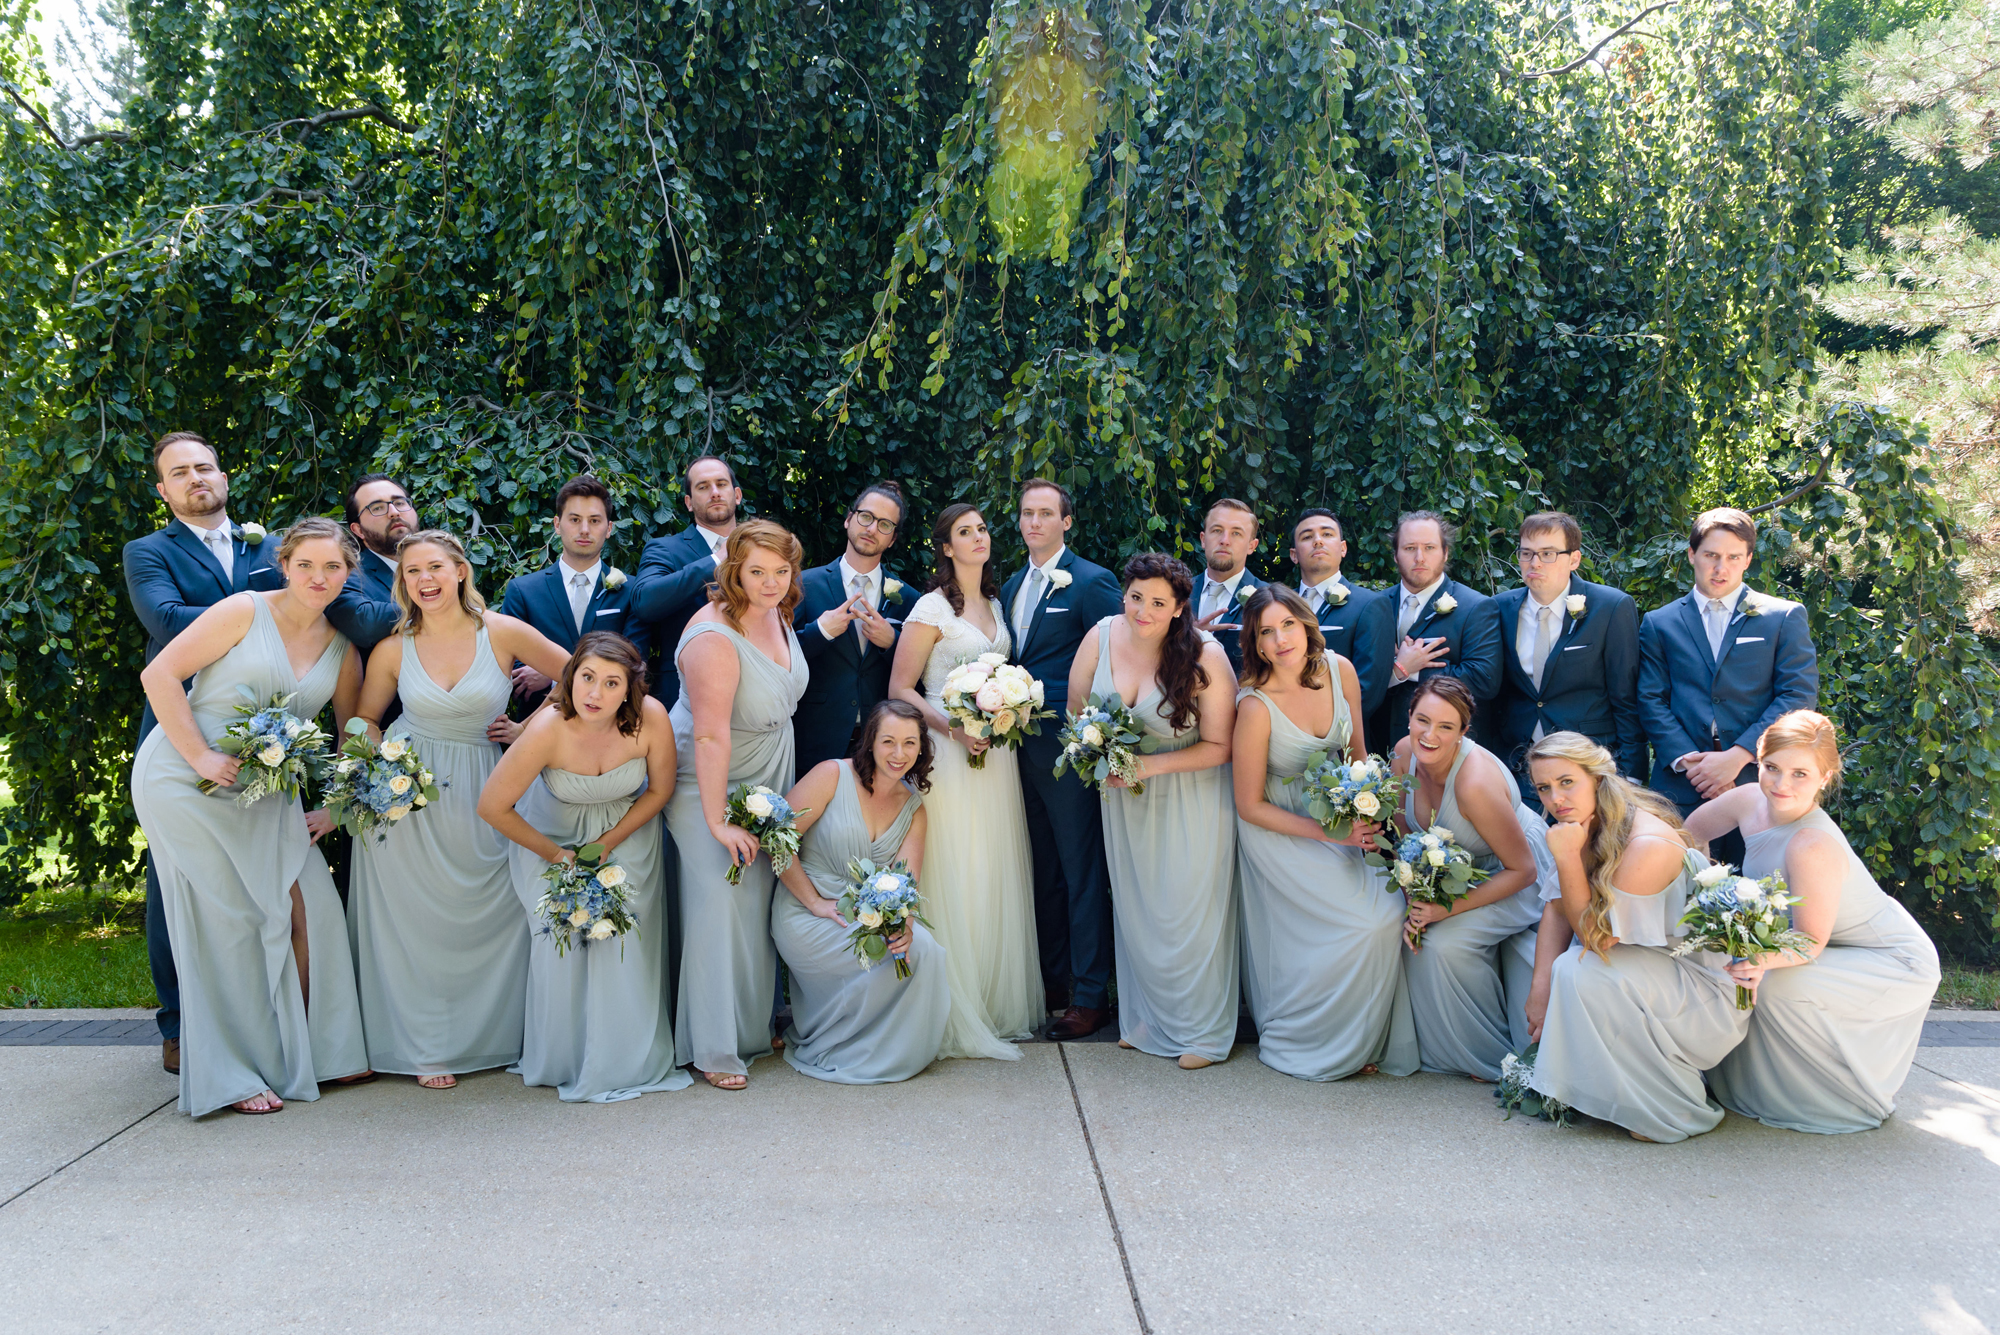 Bridal Party in front of an exotic California inspired tree after a wedding ceremony at the Basilica of the Sacred Heart on the campus of the University of Notre Dame